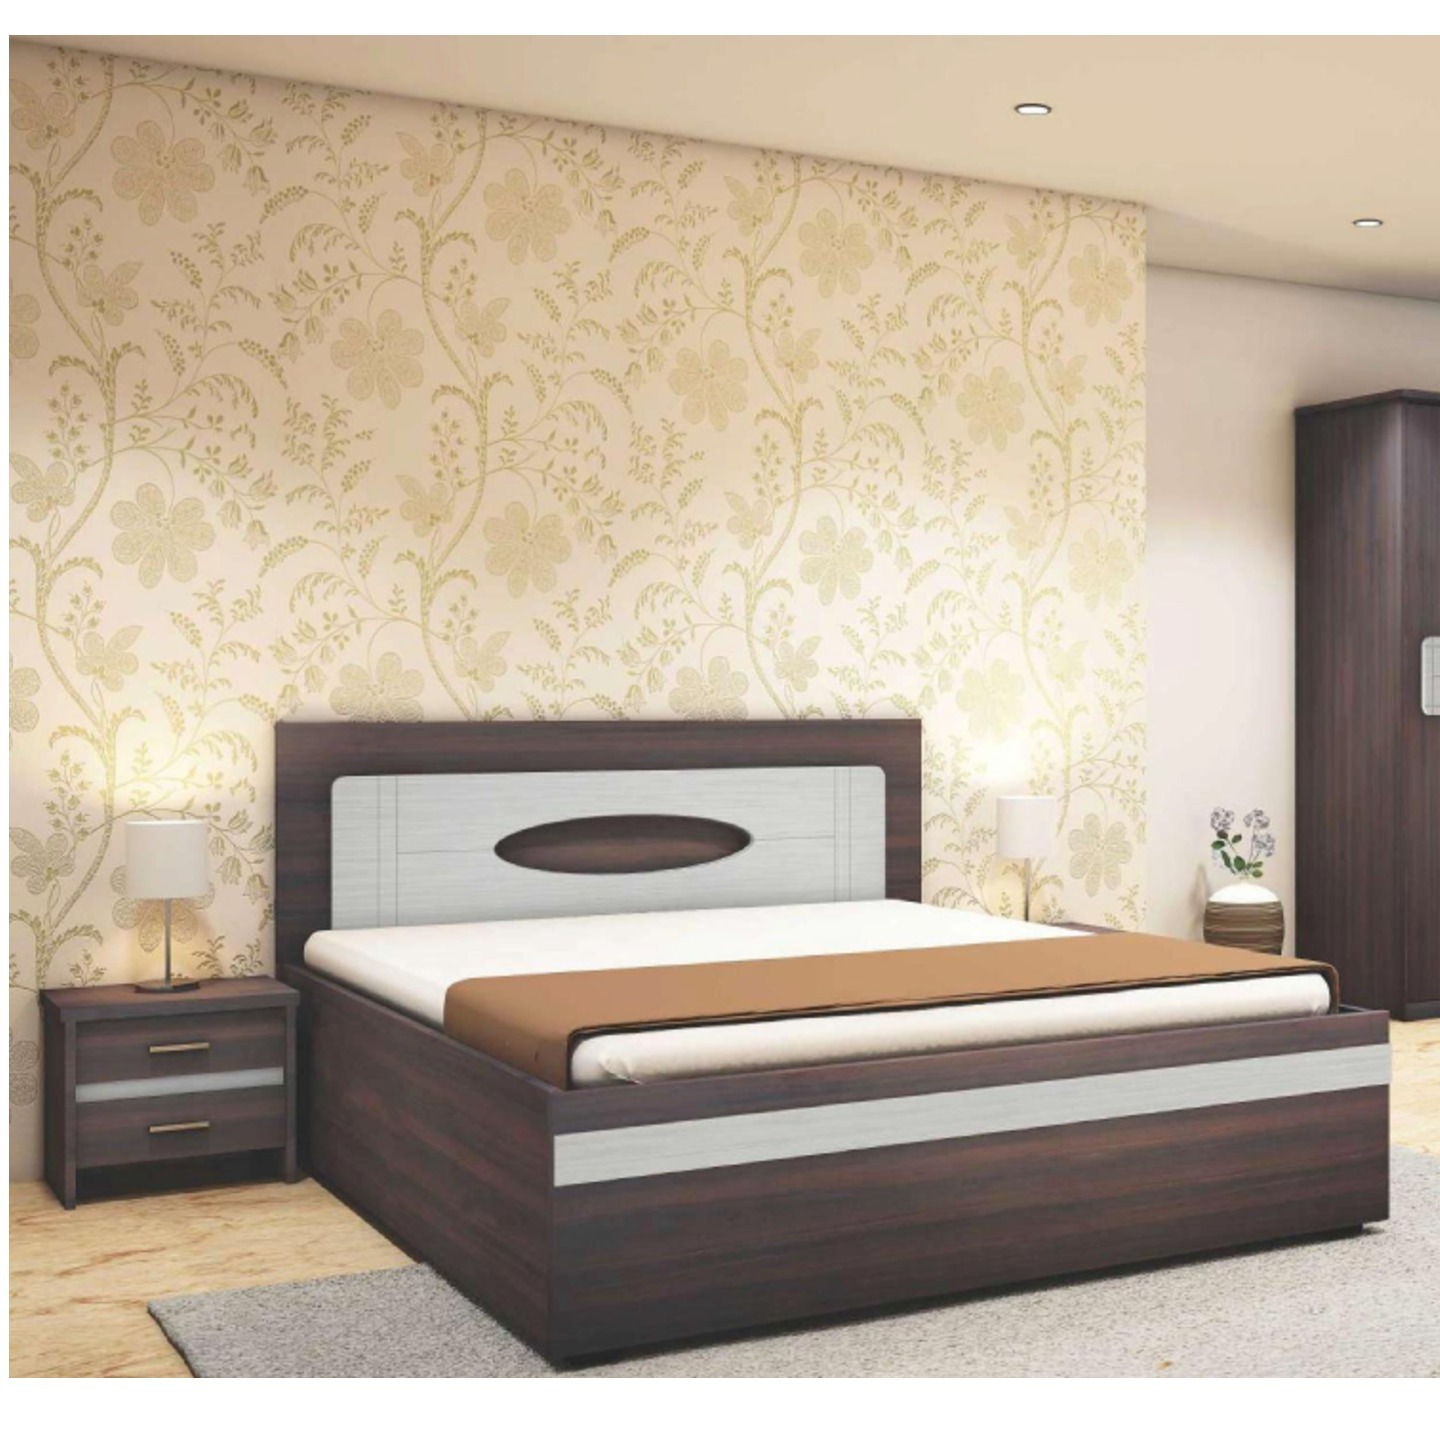 RD Queen Size Bed With Box Bed 78x 60 Korum